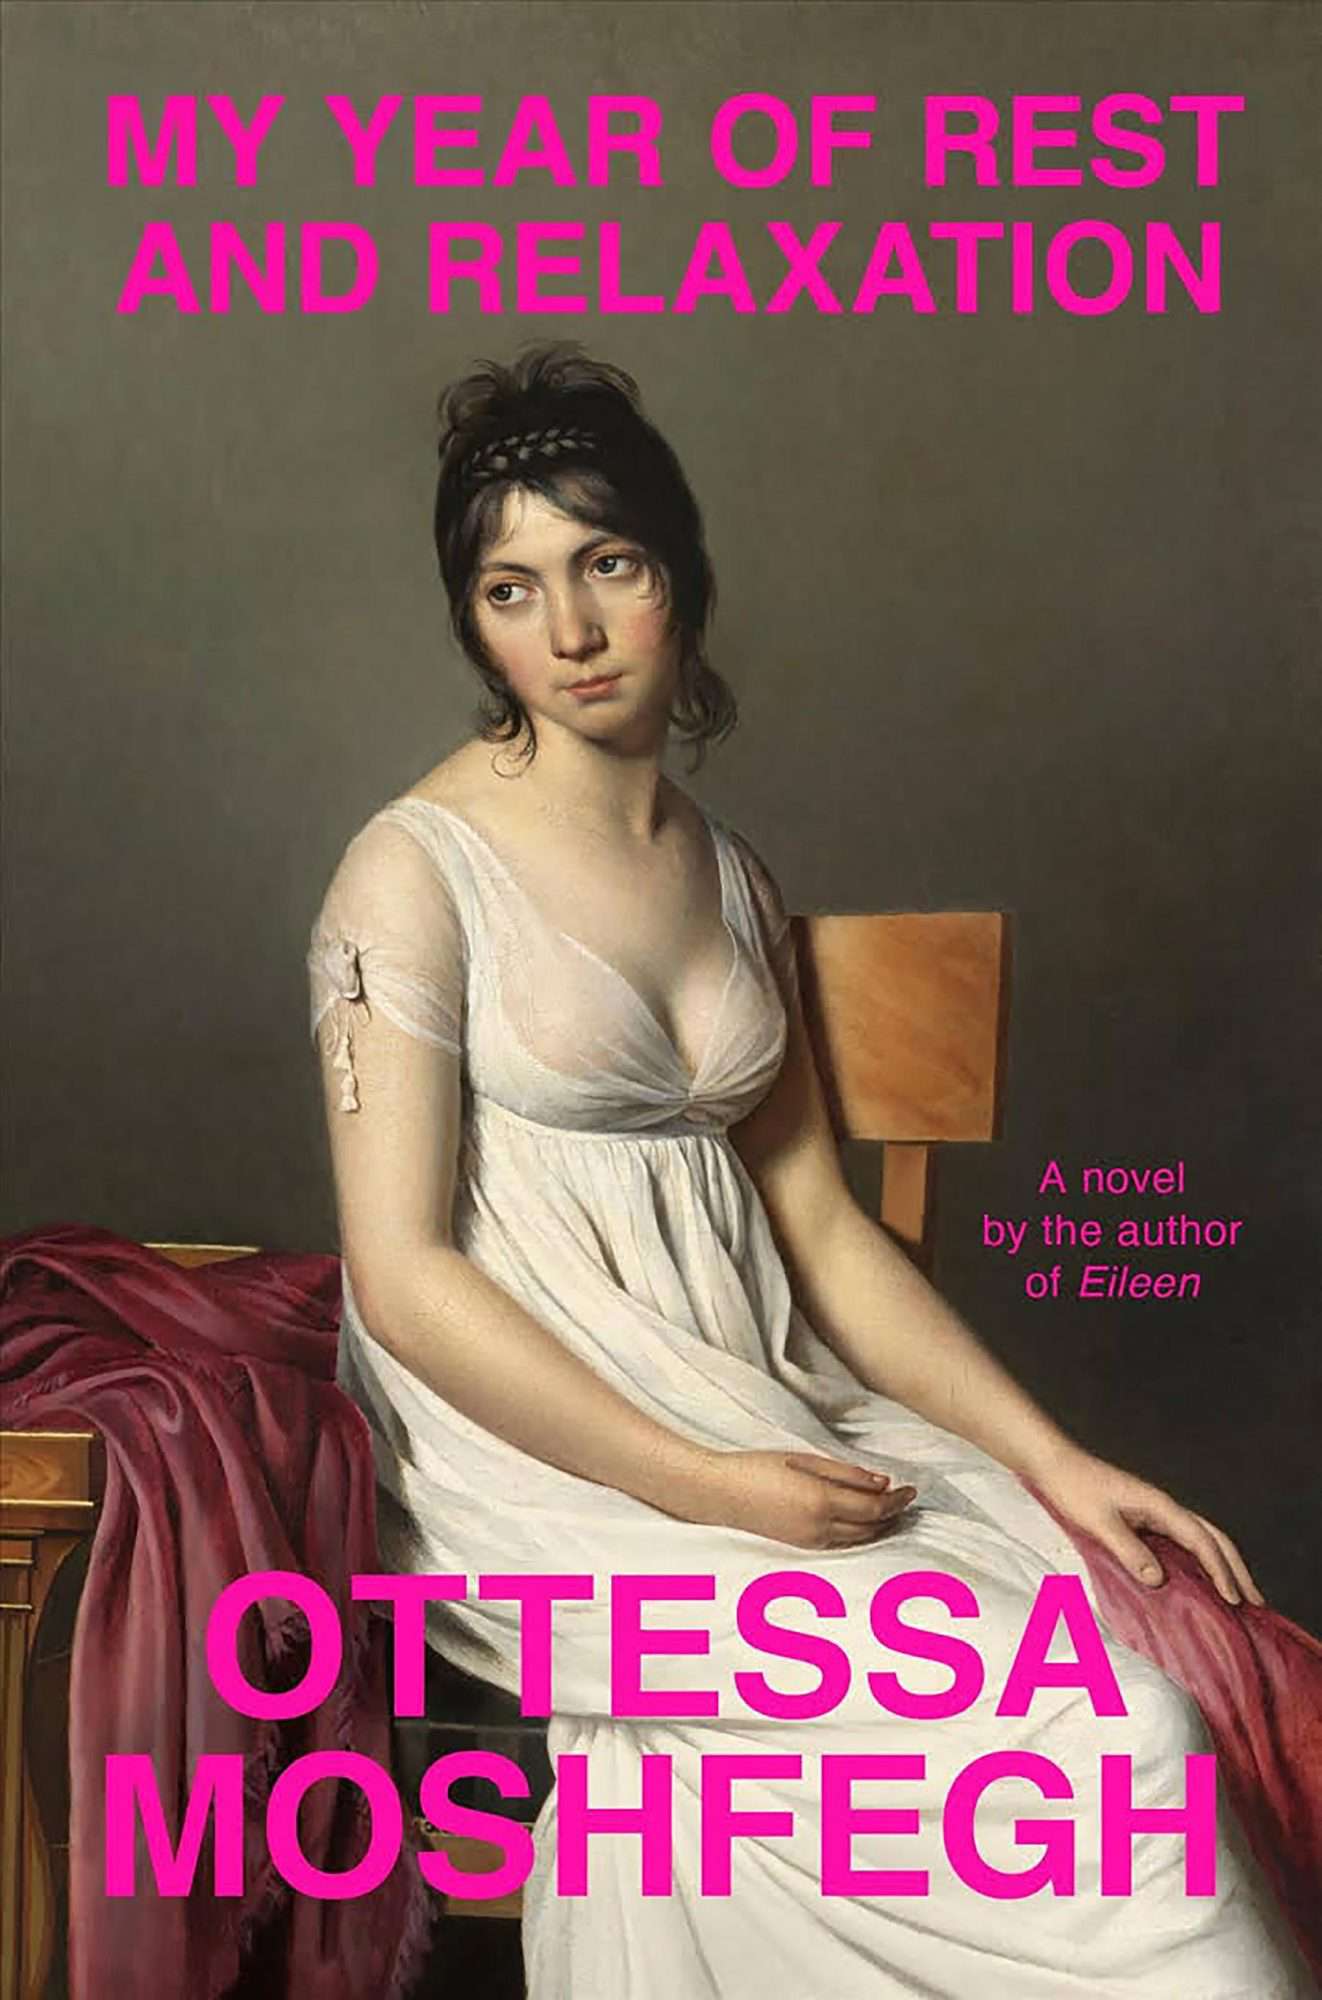 My Year of Rest and RelaxationNovel by Ottessa Moshfegh CR: Penguin